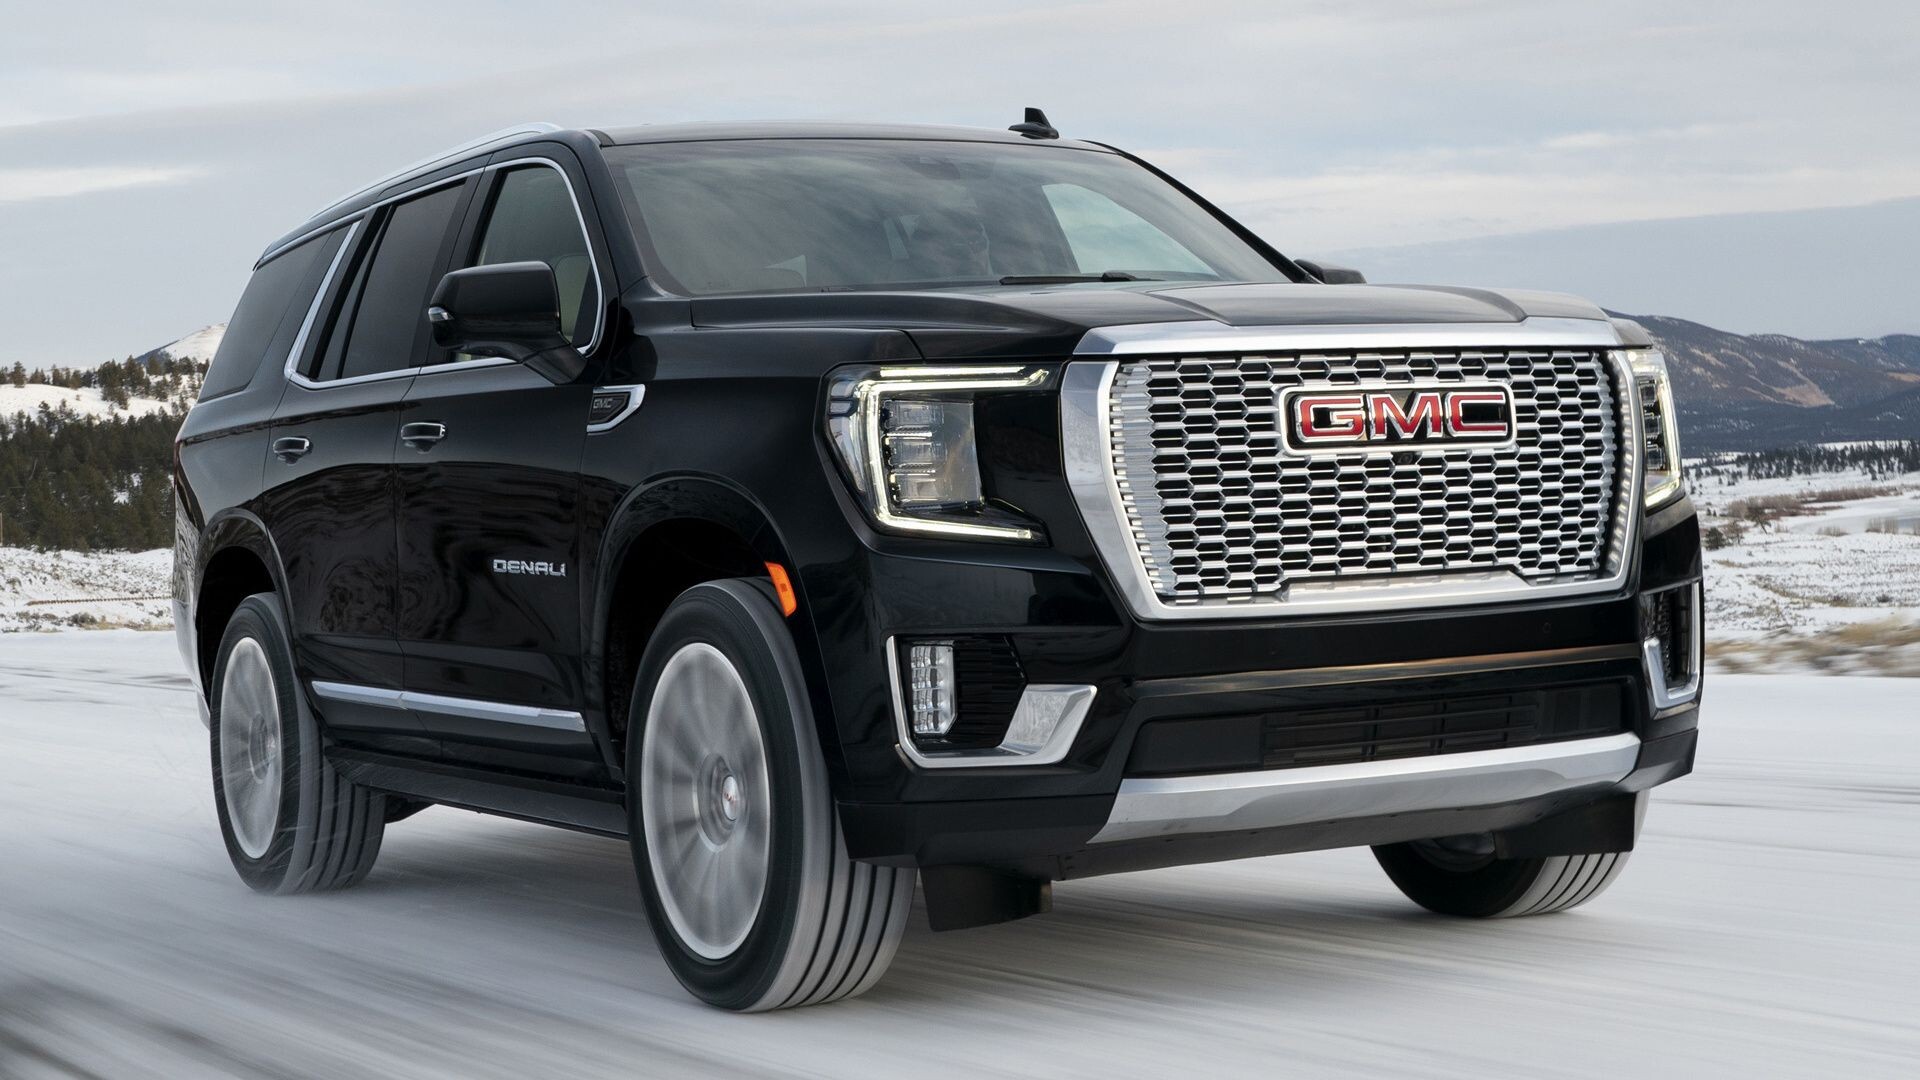 GMC: 2021 Yukon, A truck with a bold look, A redesigned front fascia and grille. 1920x1080 Full HD Wallpaper.